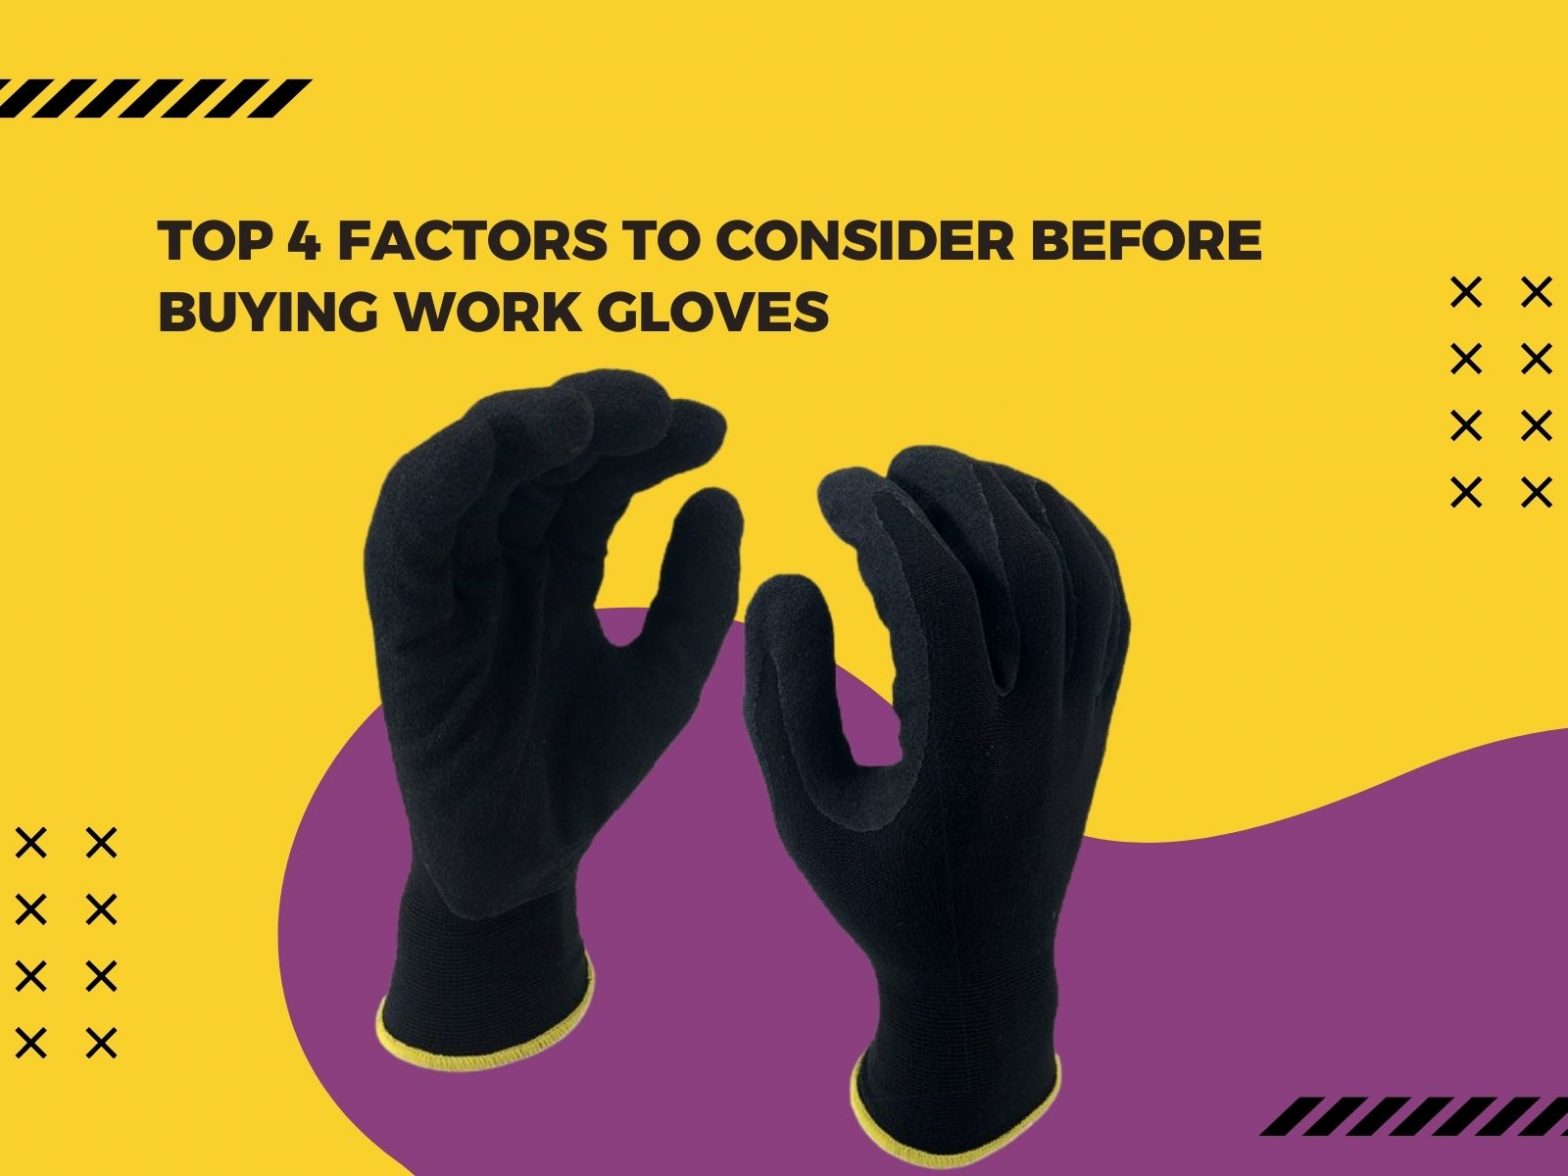 Top 4 Factors To Consider Before Buying Work Gloves